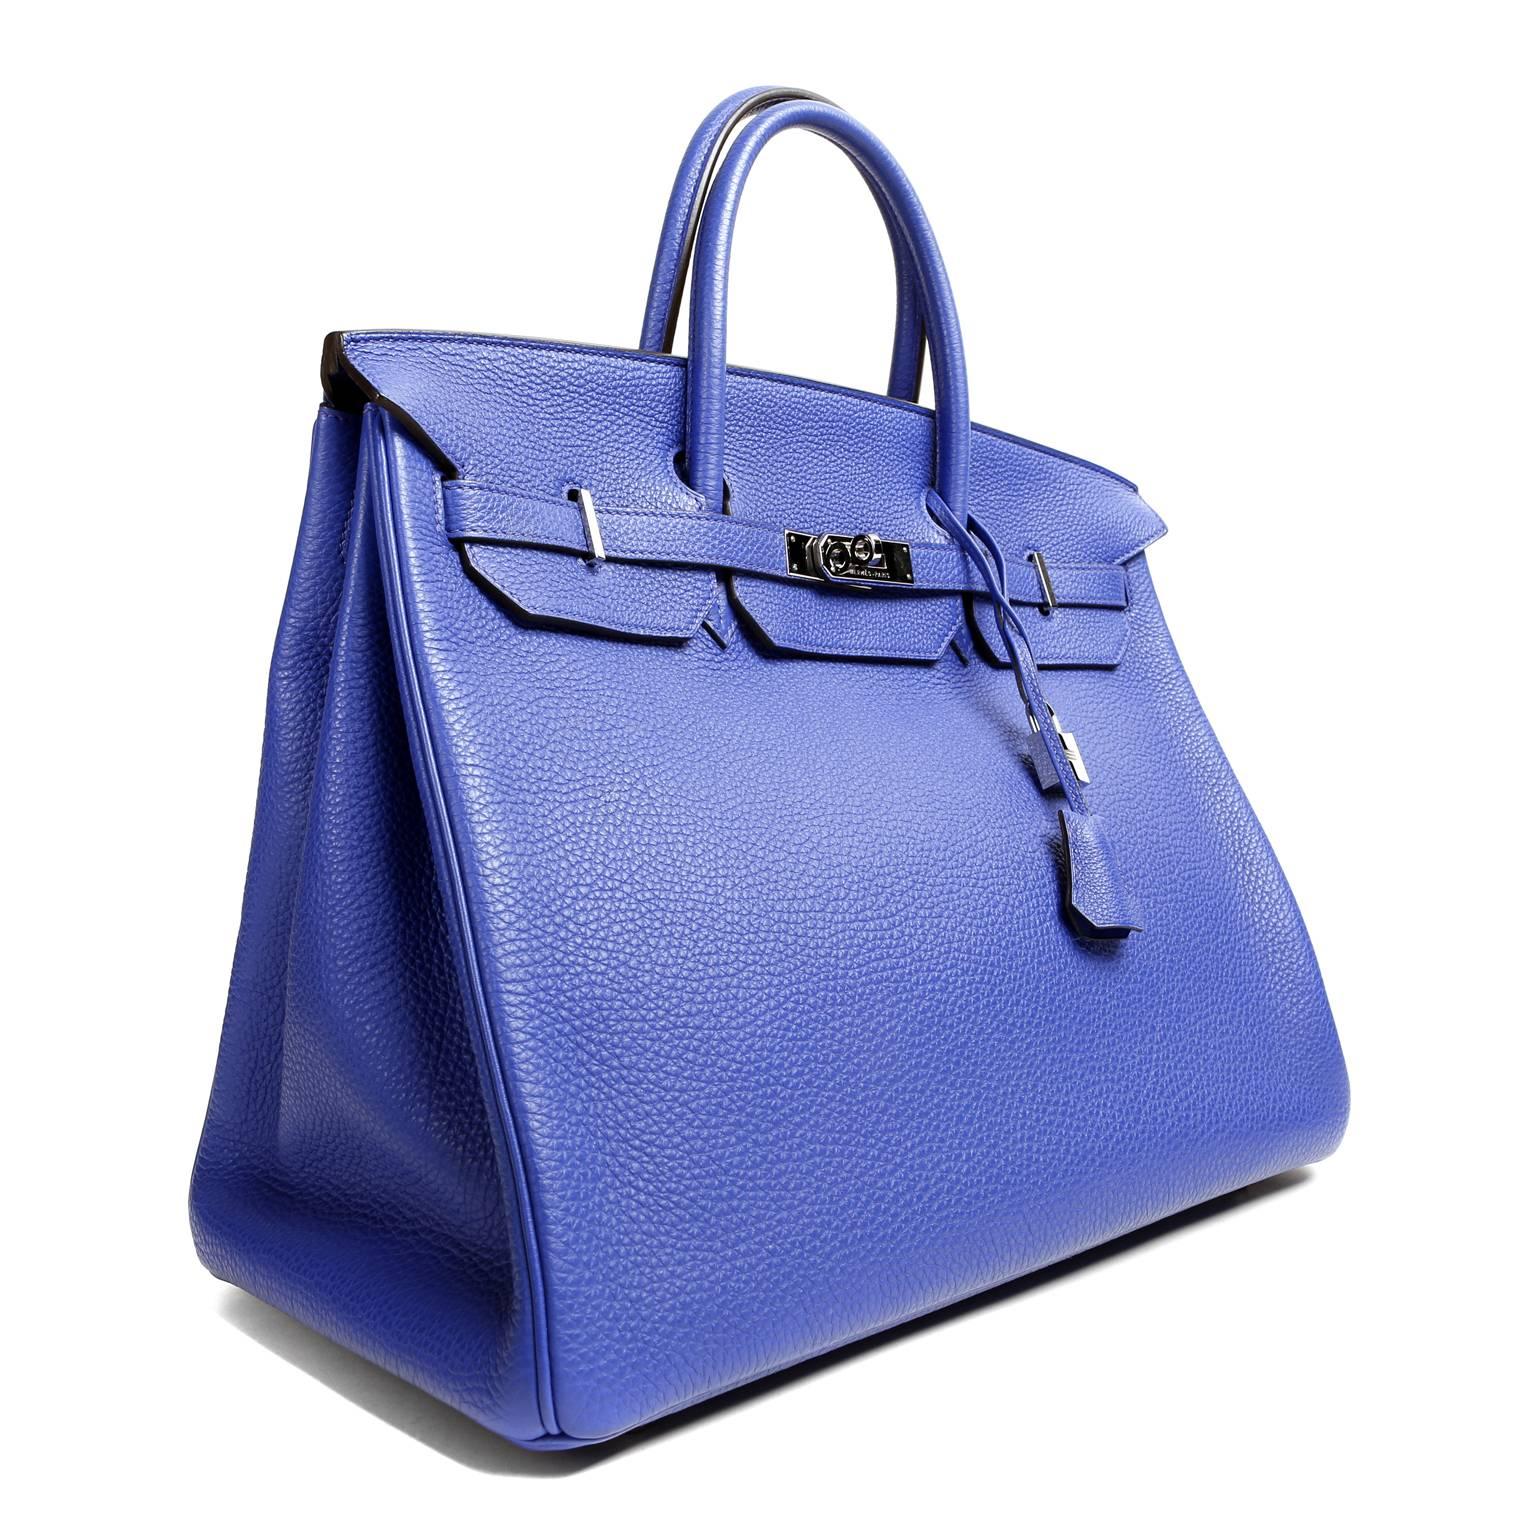 Hermès  Bleu Electrique Togo 40 cm Birkin Bag- PRISTINE
 A brilliant pop of color for any wardrobe in stunning Bleu Electrique Togo.   Truly a must have for blue lovers, Bleu Electrique makes every other color come alive.  
Waitlists exceeding a